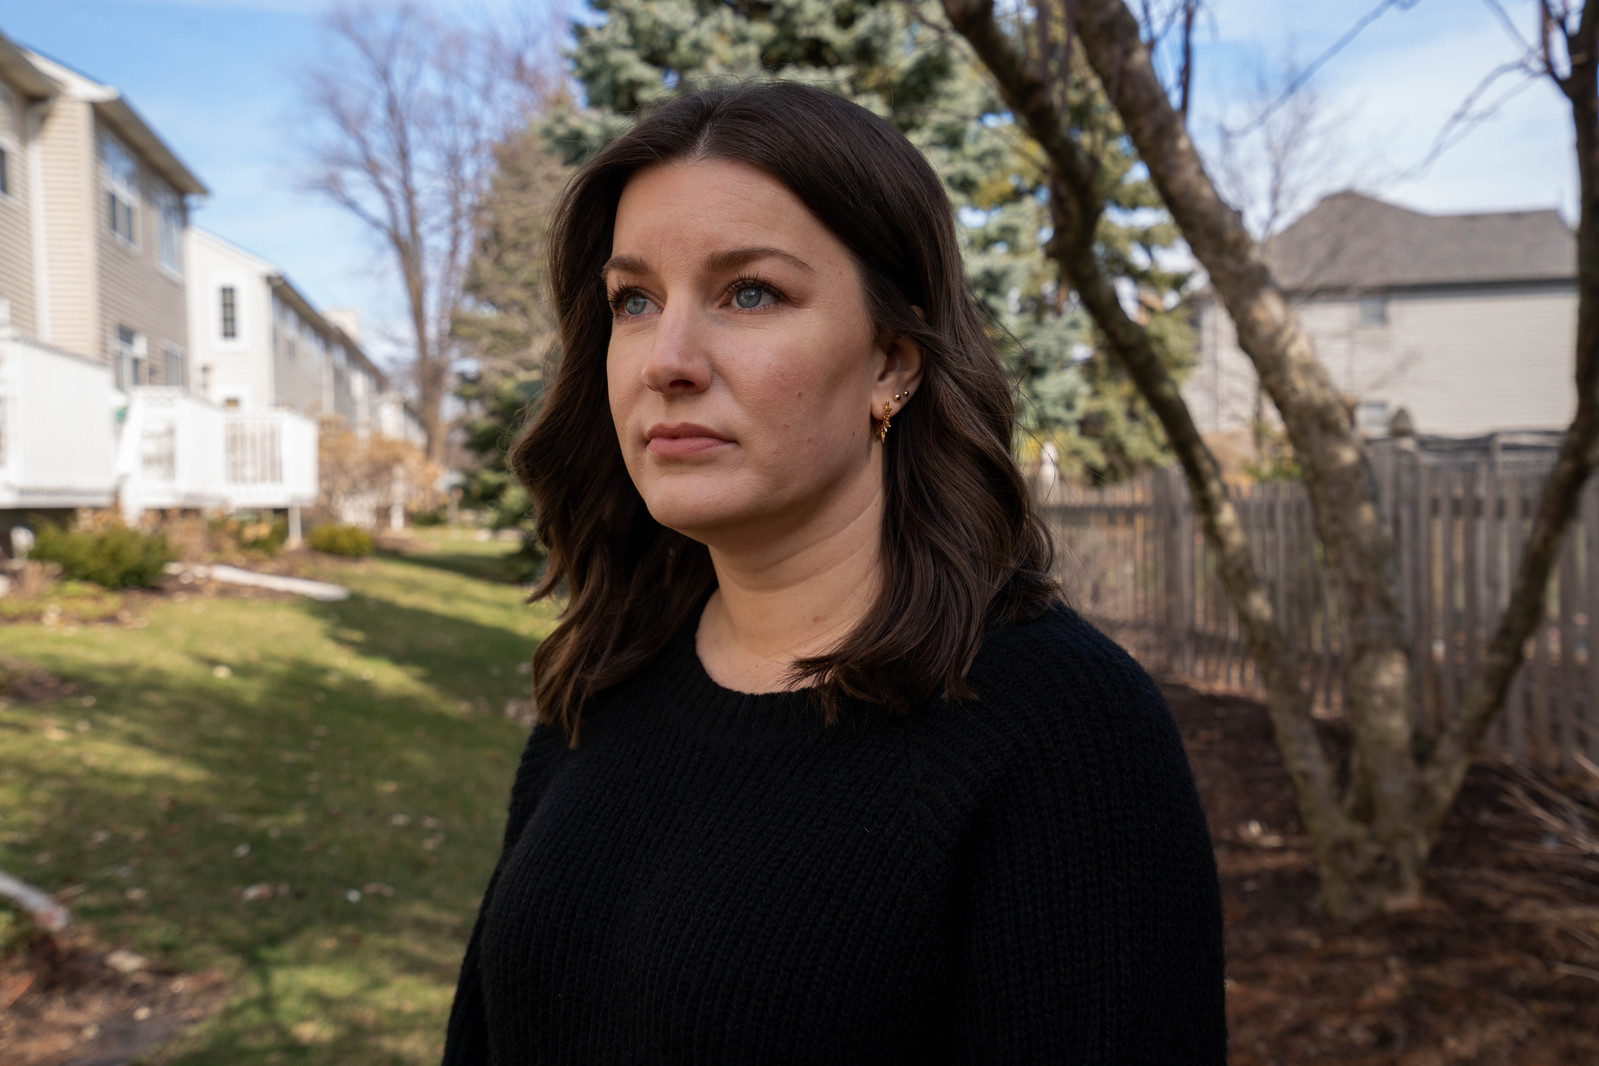 Amanda Luciano, 37, attended a that college was accused of misconduct, but because she had been steered to take a private loan instead of a federal one, she cannot get debt relief from a recent $6 billion settlement. 